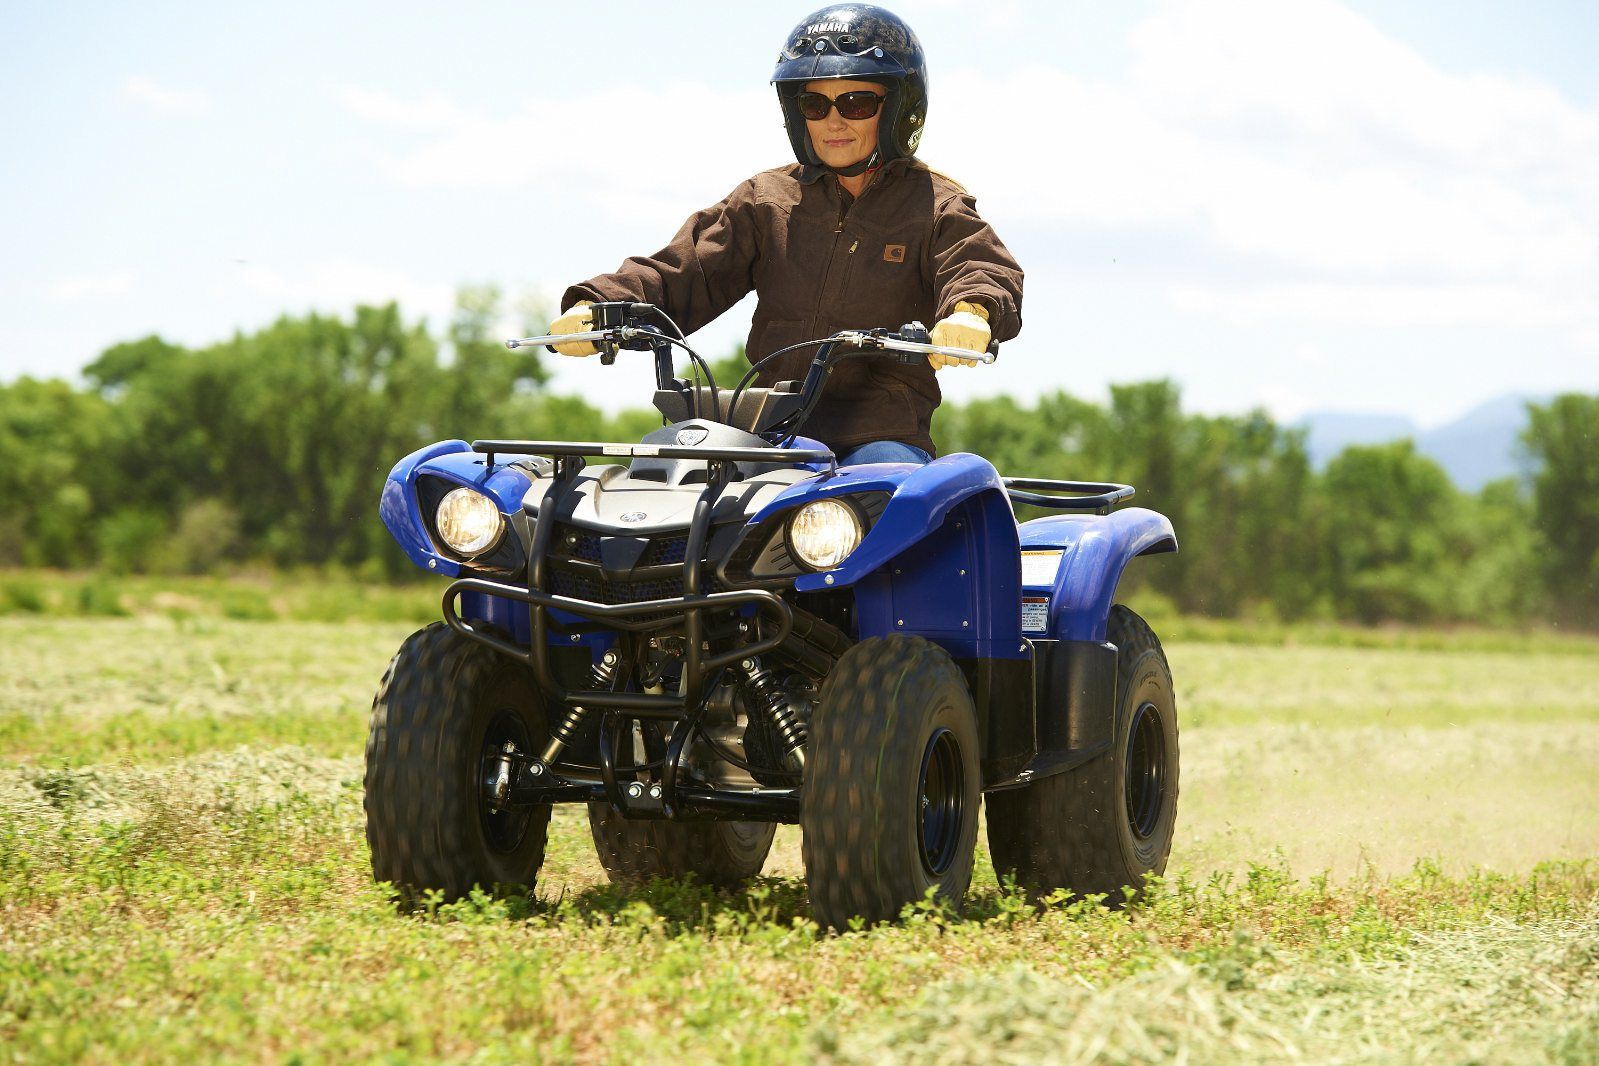 2012 Yamaha Grizzly 125 Automatic